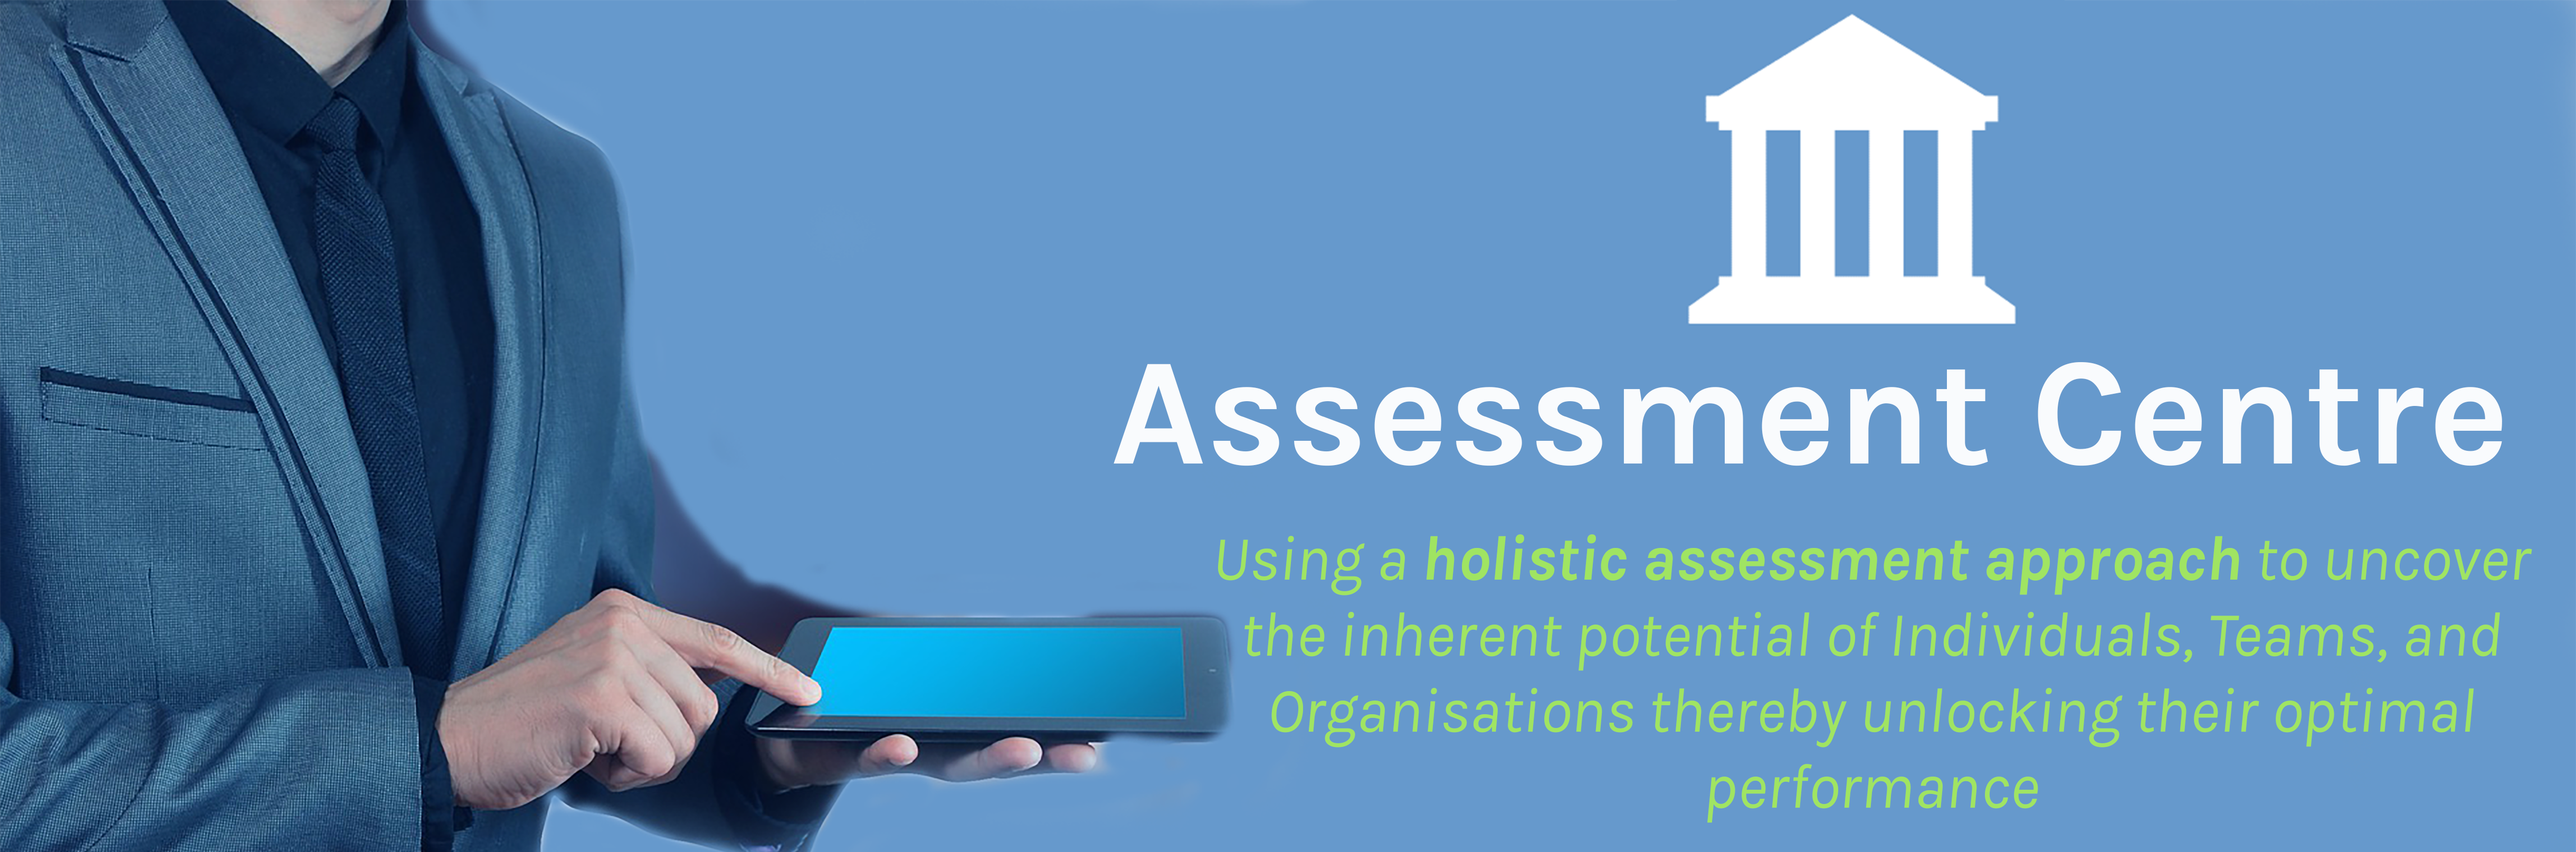 Assessment Centre page